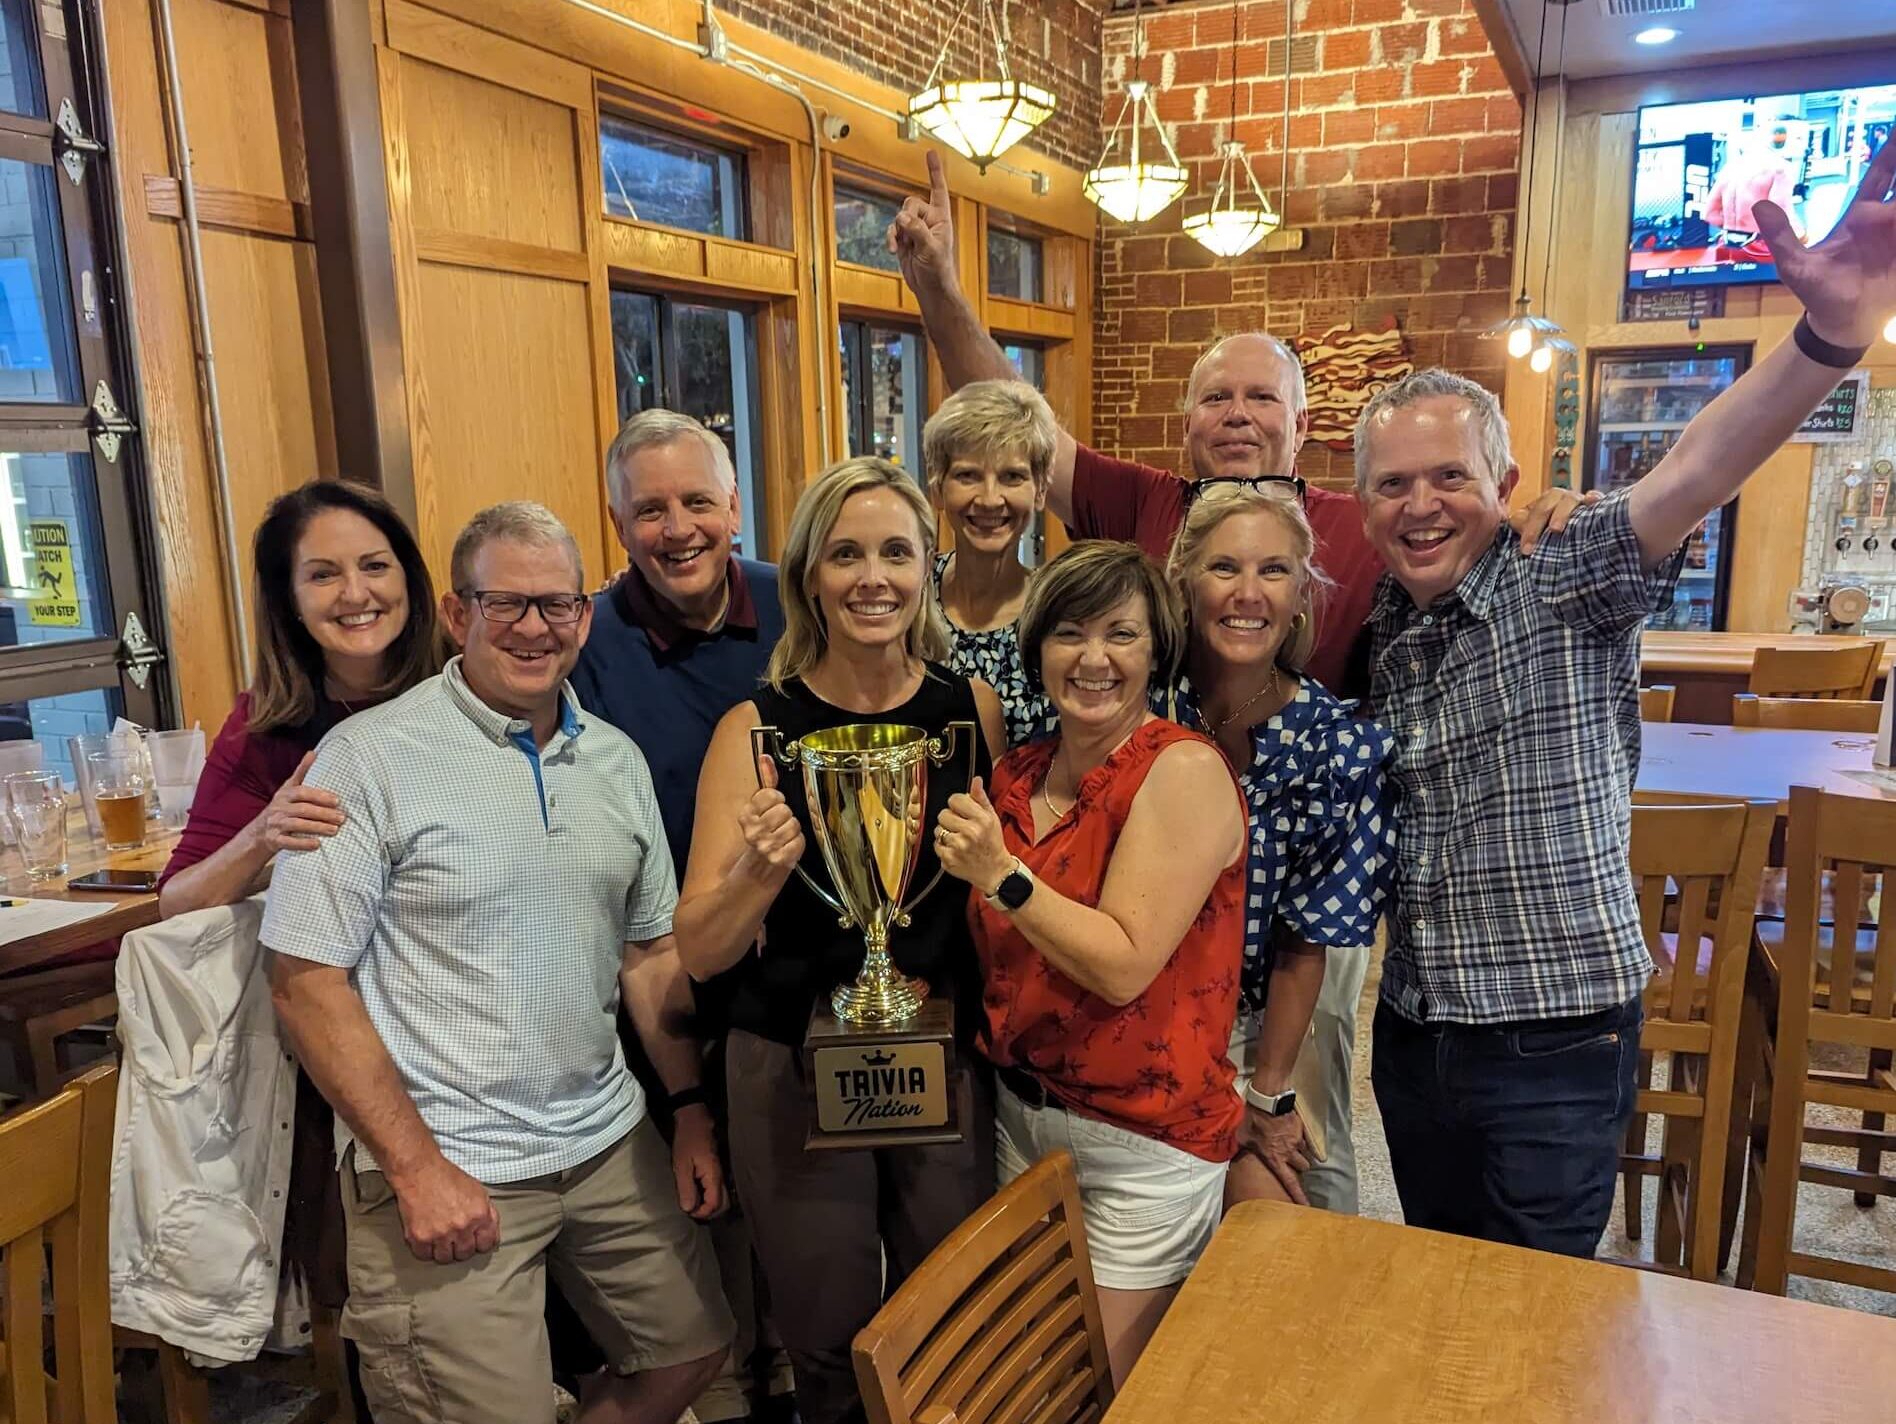 Sanford Brewing Company Sanford FL 32771 trivia night: group of adults smiling and having a good time with a woman in the middle holding a trophy and with bar lights overhead